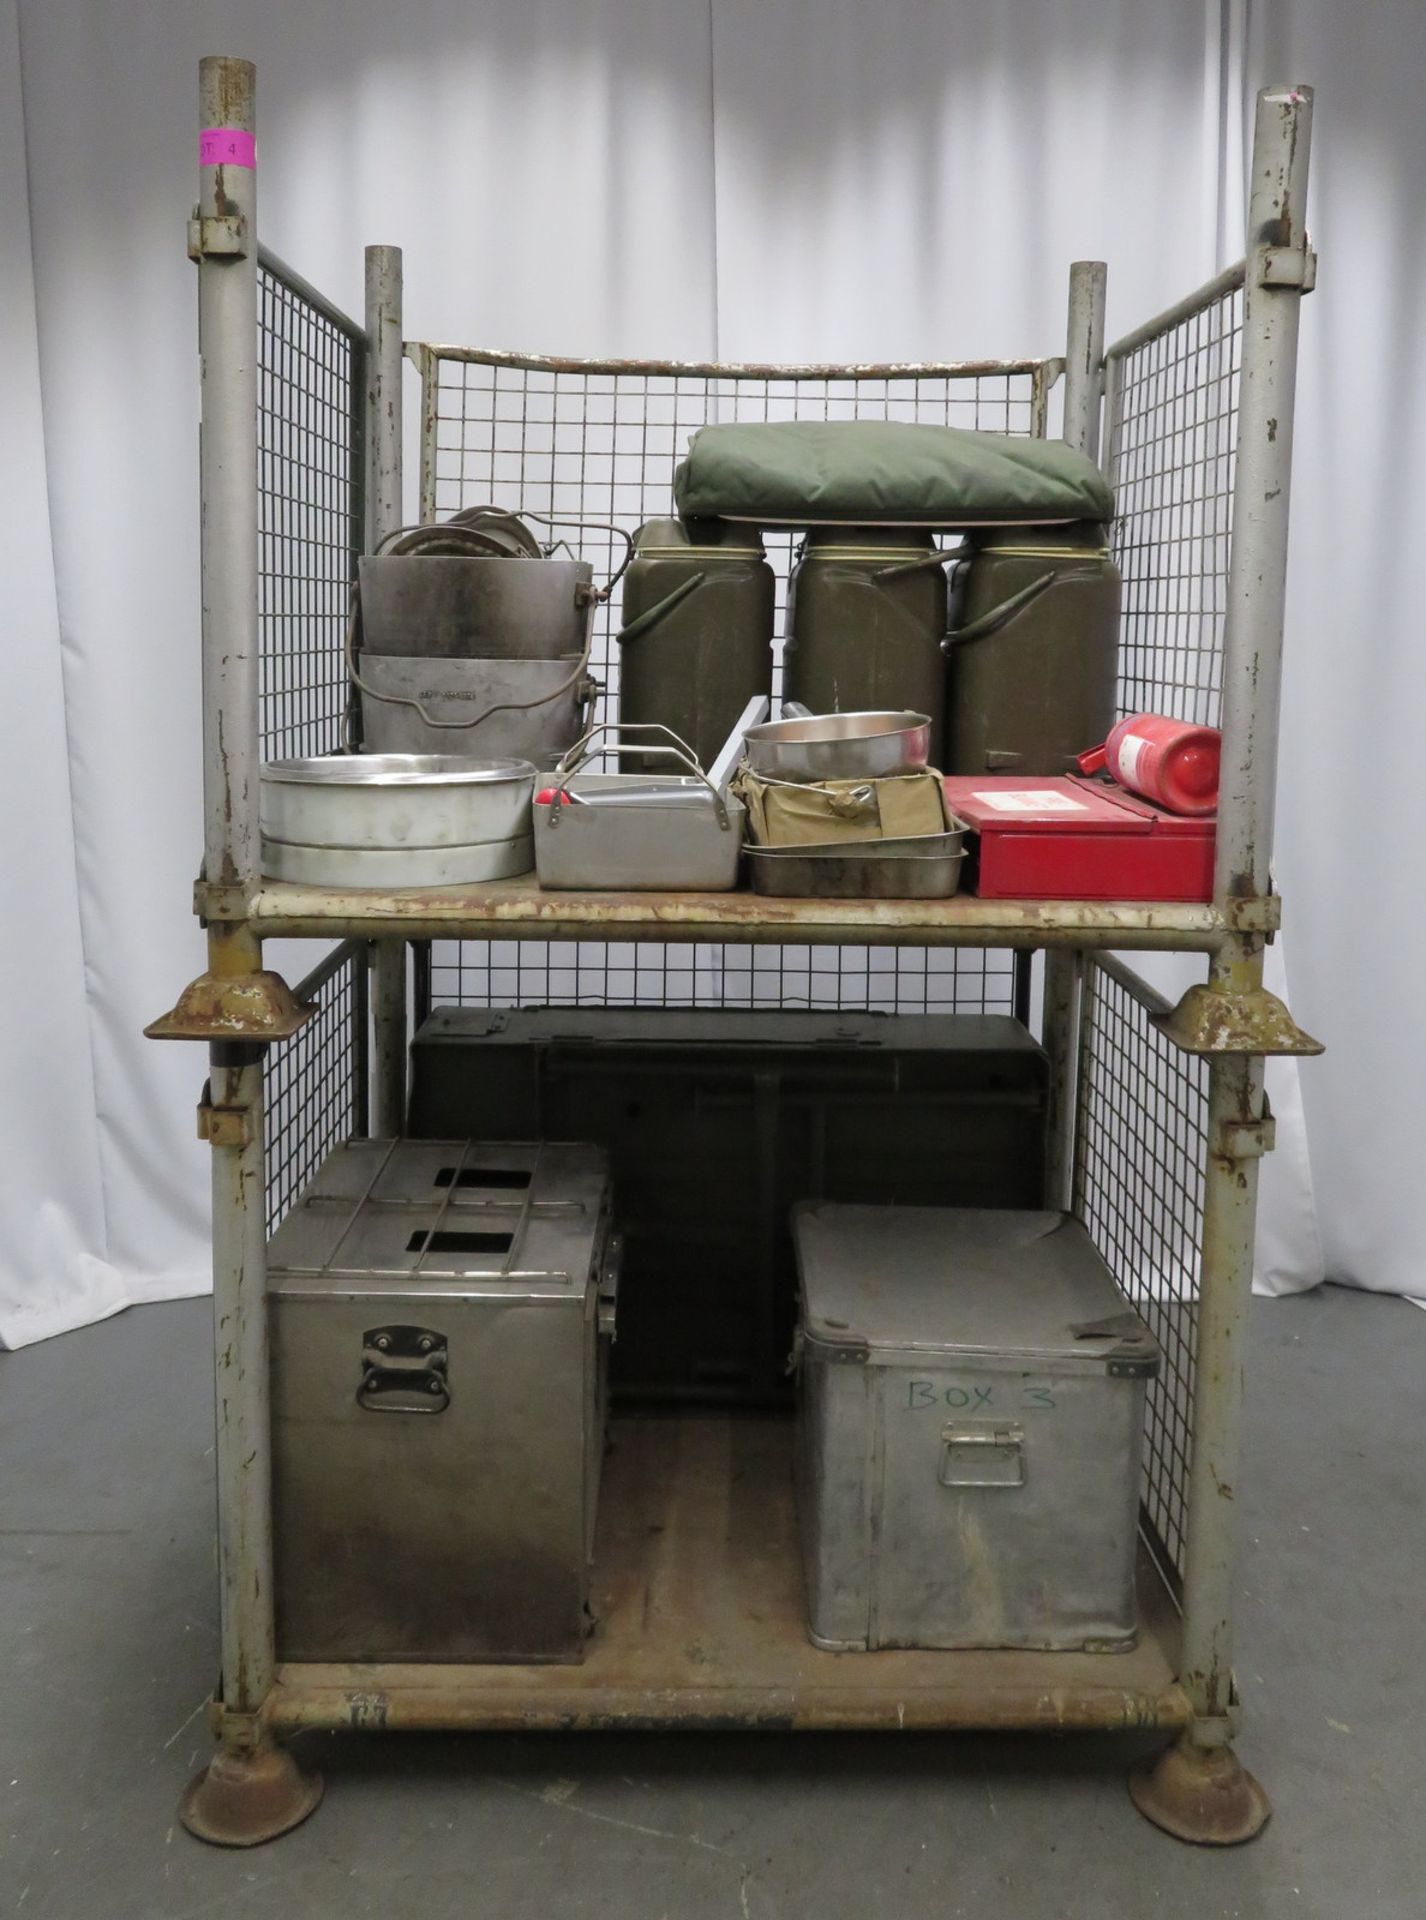 British Army No 5 field cooker & G1 No 5 hot box field oven set. - Image 2 of 18